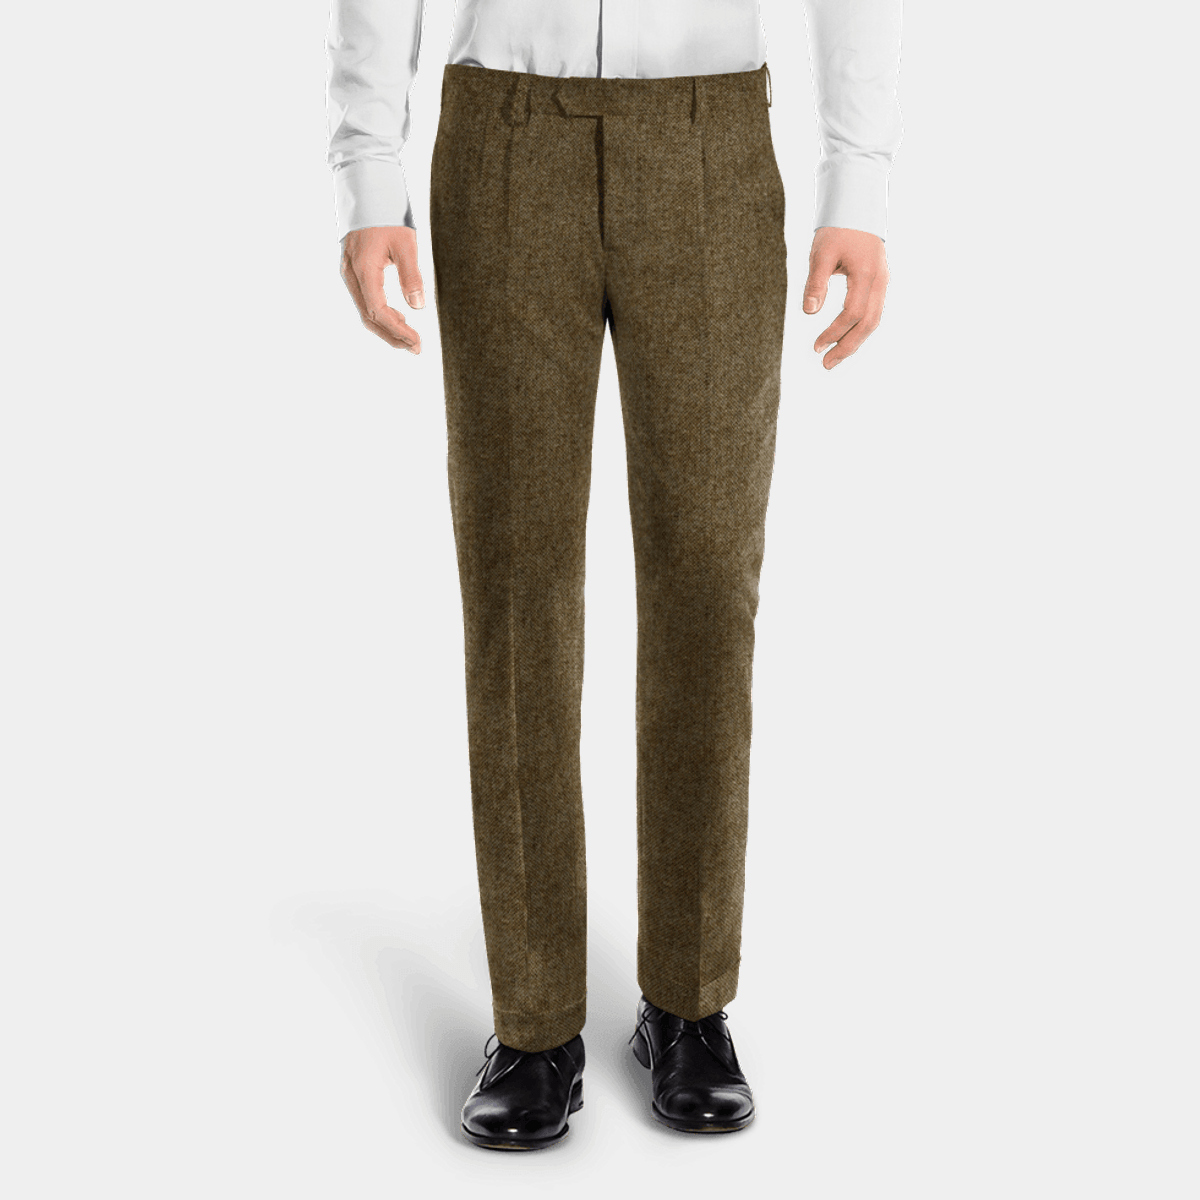 Brown donegal tweed double pleat cuffed Trousers